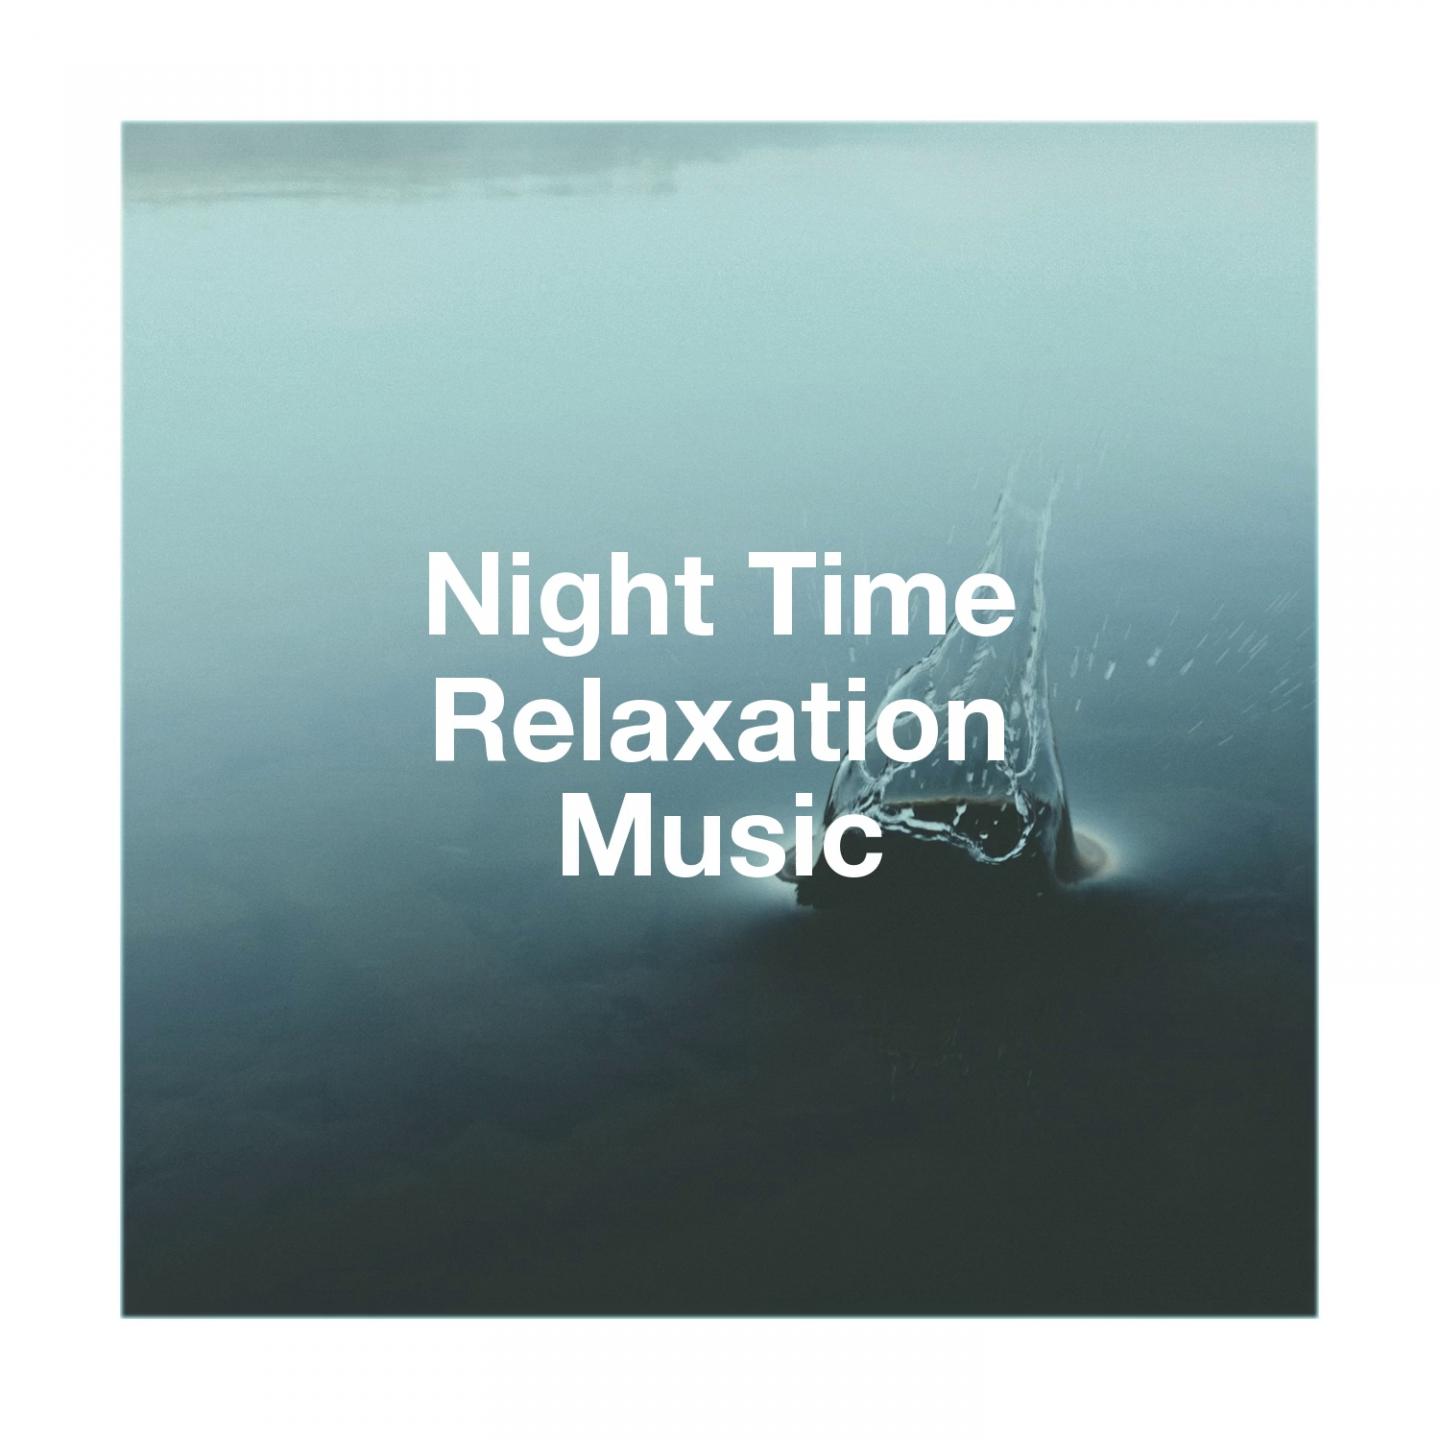 Night Time Relaxation Music